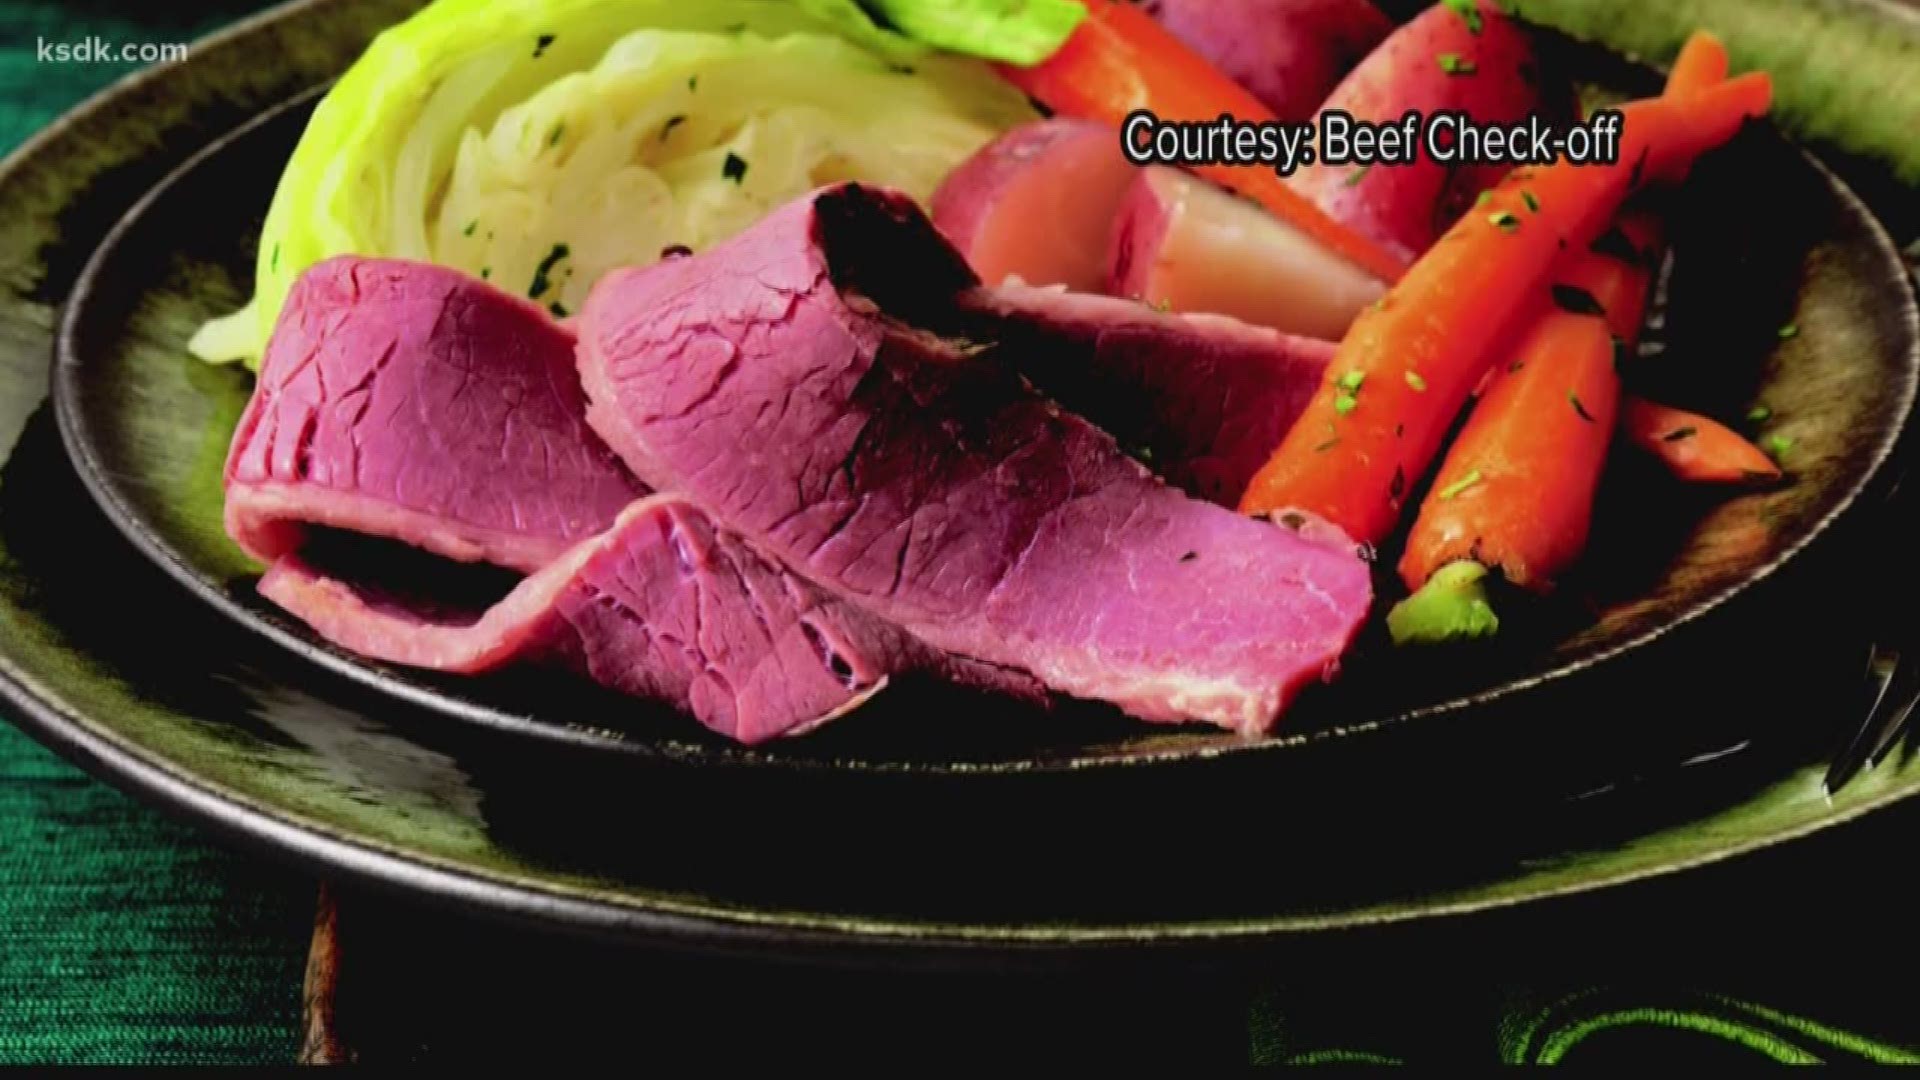 Food Writer Suzanne Corbett joined Show Me St. Louis with a recipe perfect for St. Patrick’s Day.